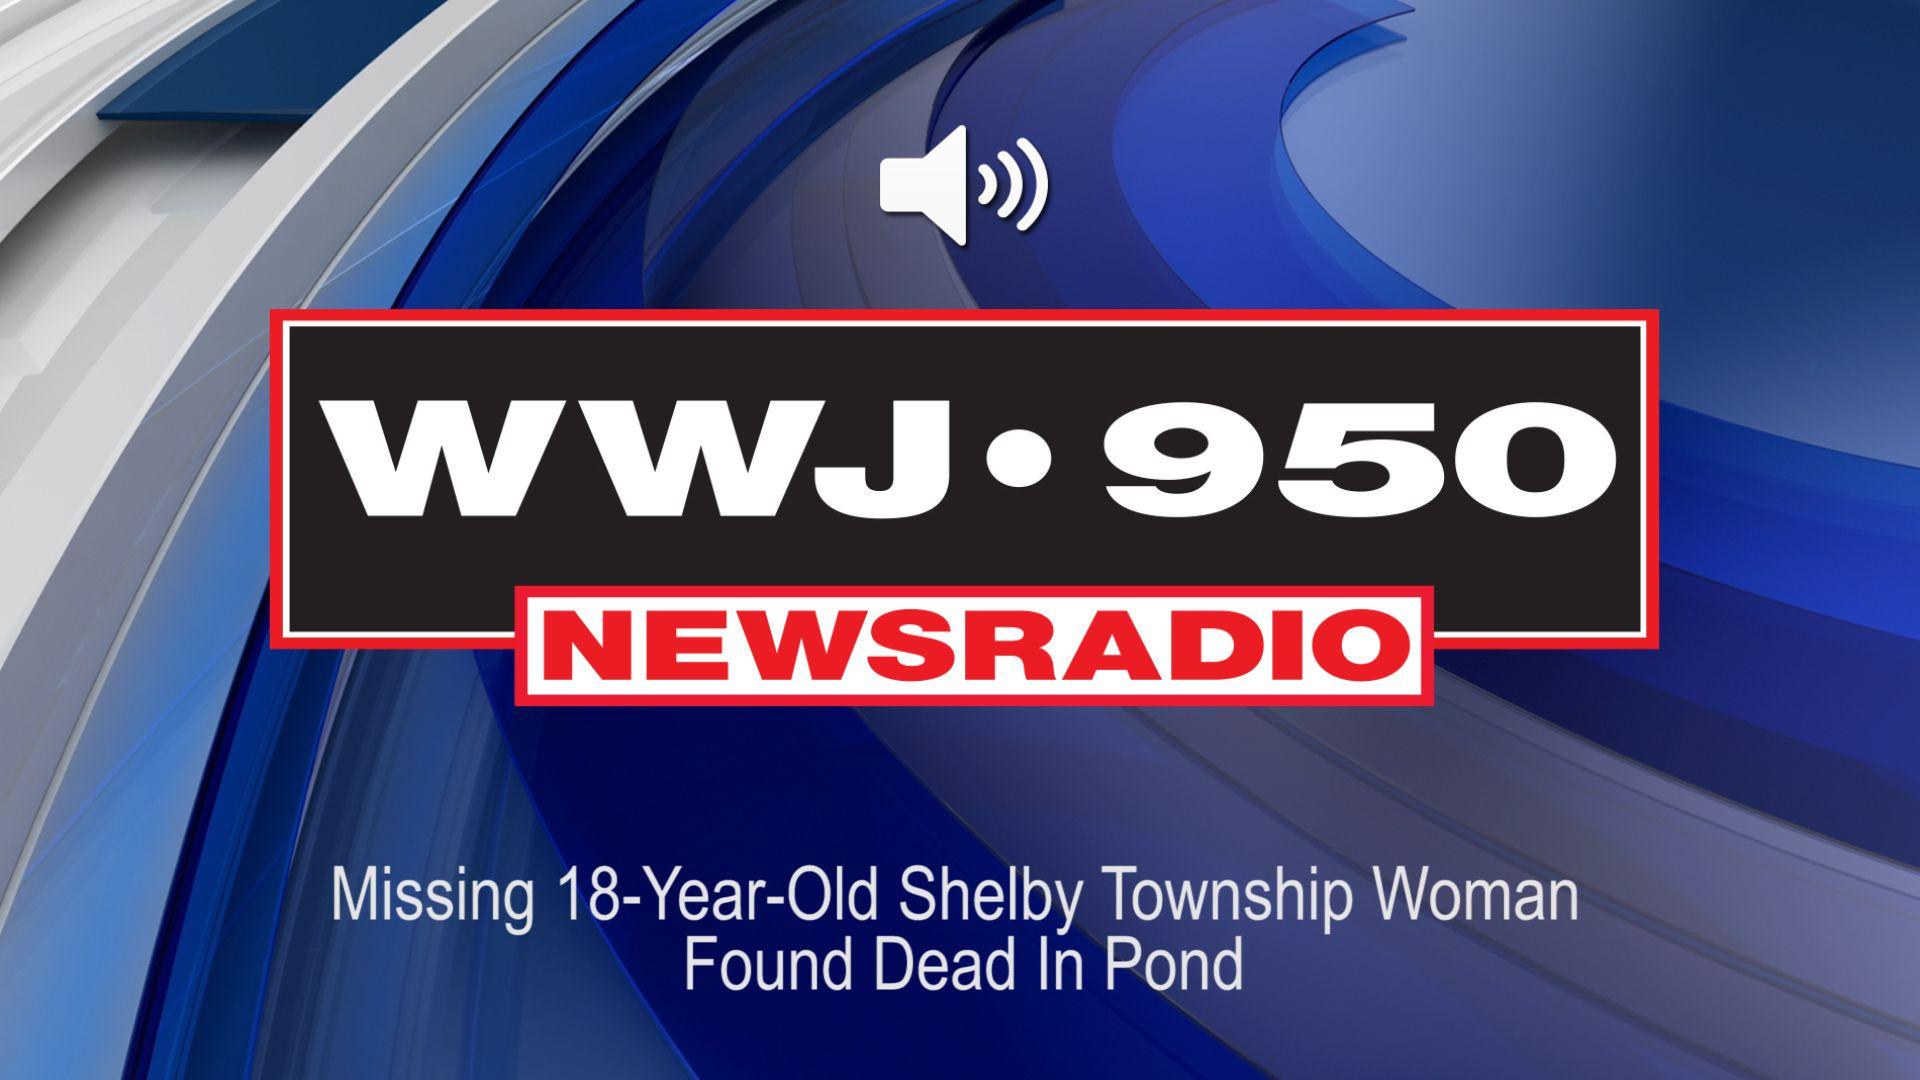 Old Shelby Logo - Missing 18-Year-Old Shelby Township Woman Found Dead In Pond; Audio ...